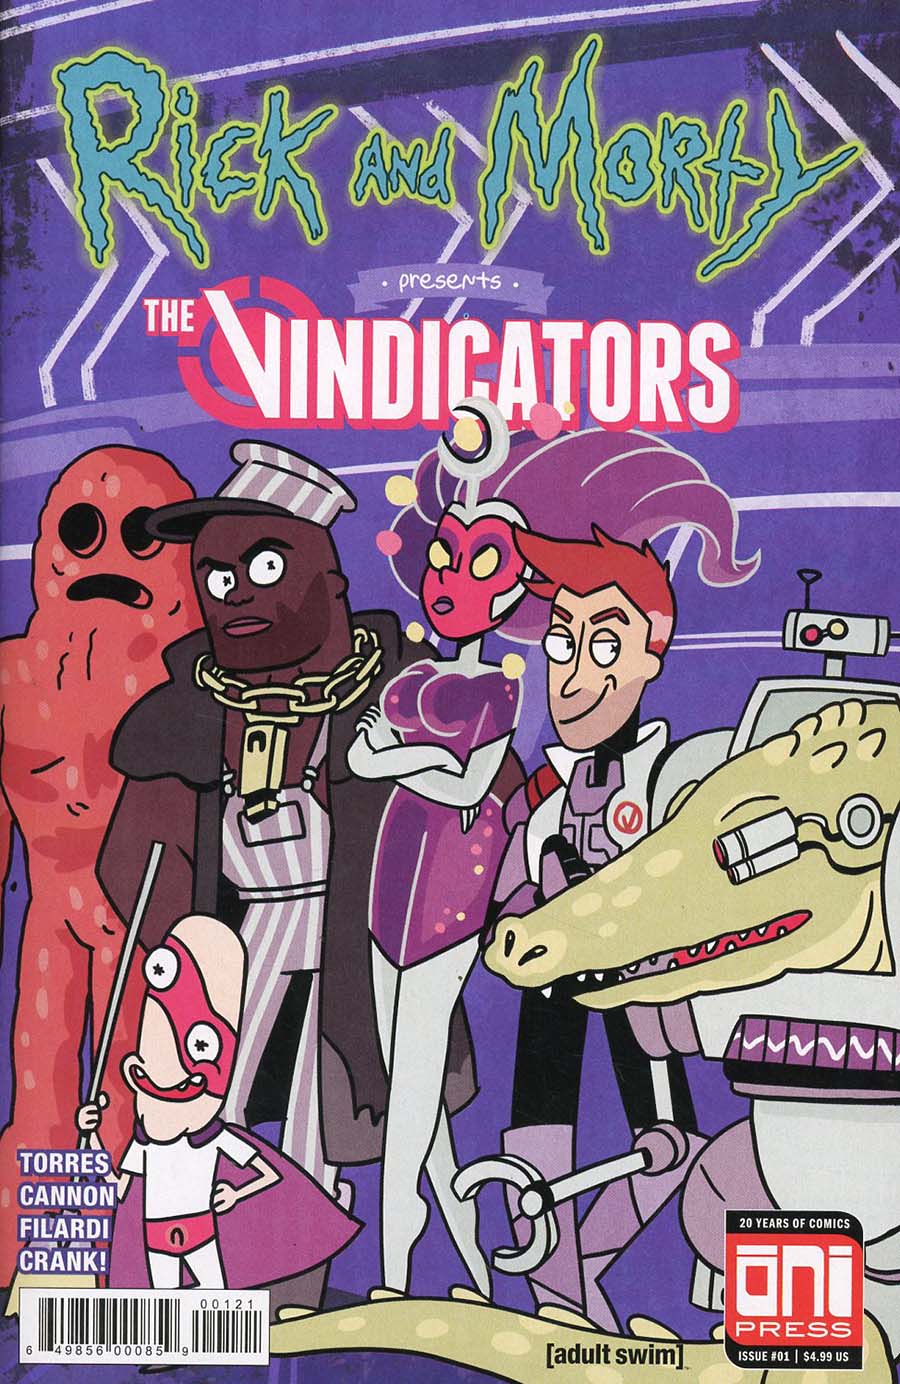 Rick And Morty Presents The Vindicators #1 Cover B Variant Caitlin Rose Boyle Cover